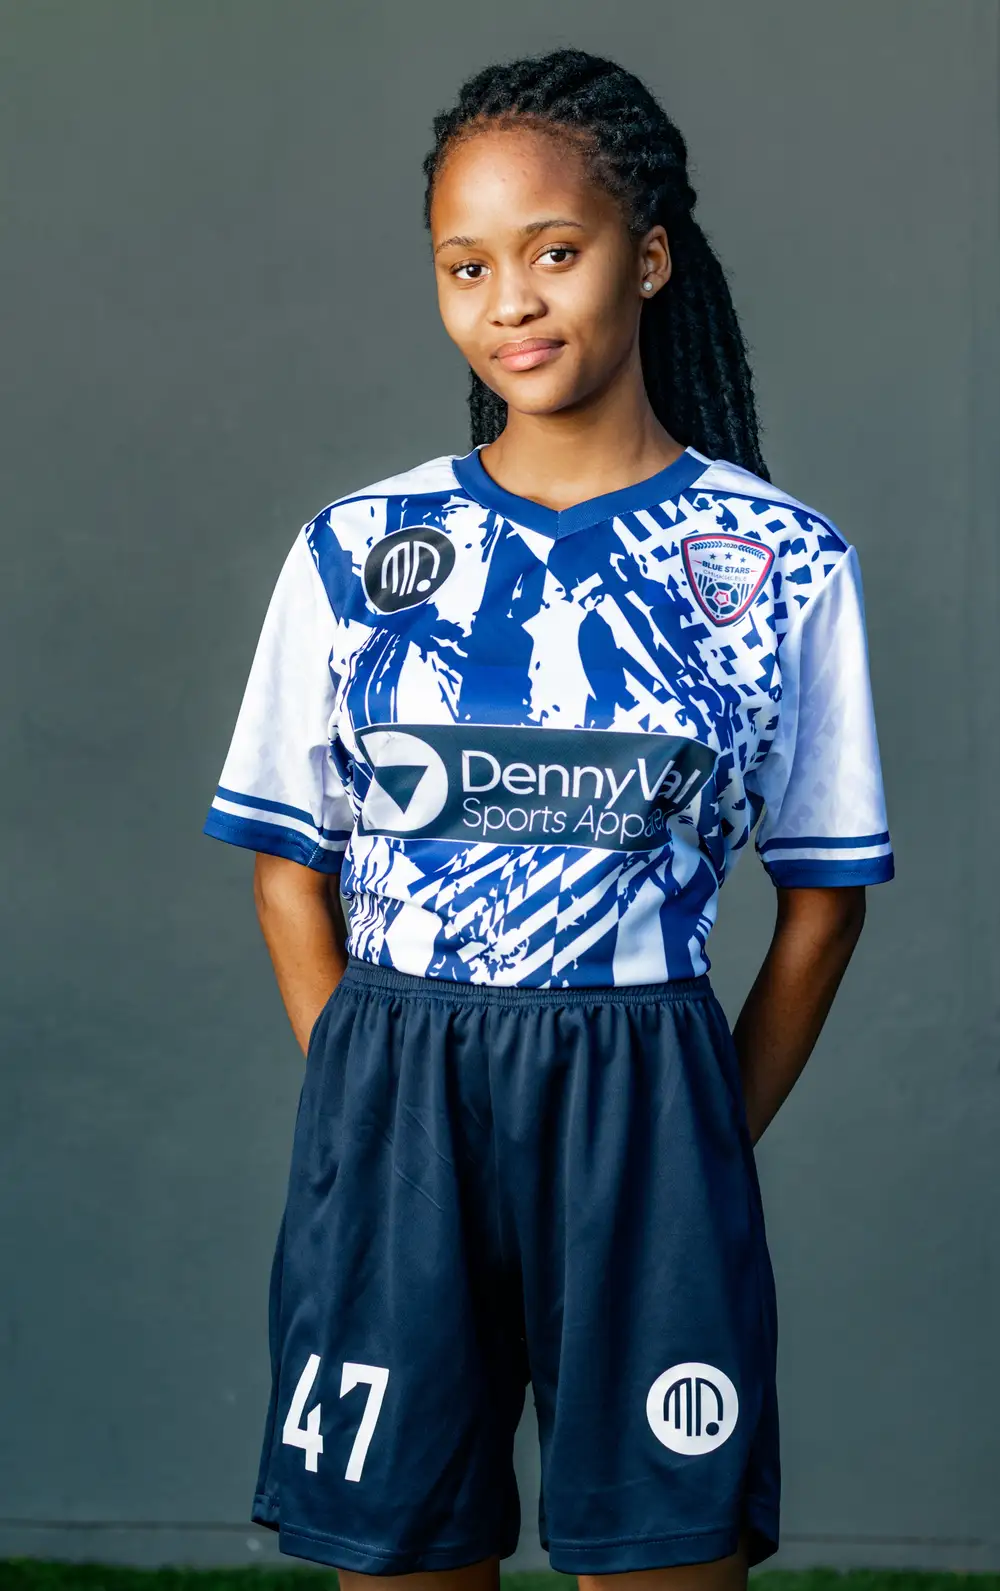 girl in blue and white jersey